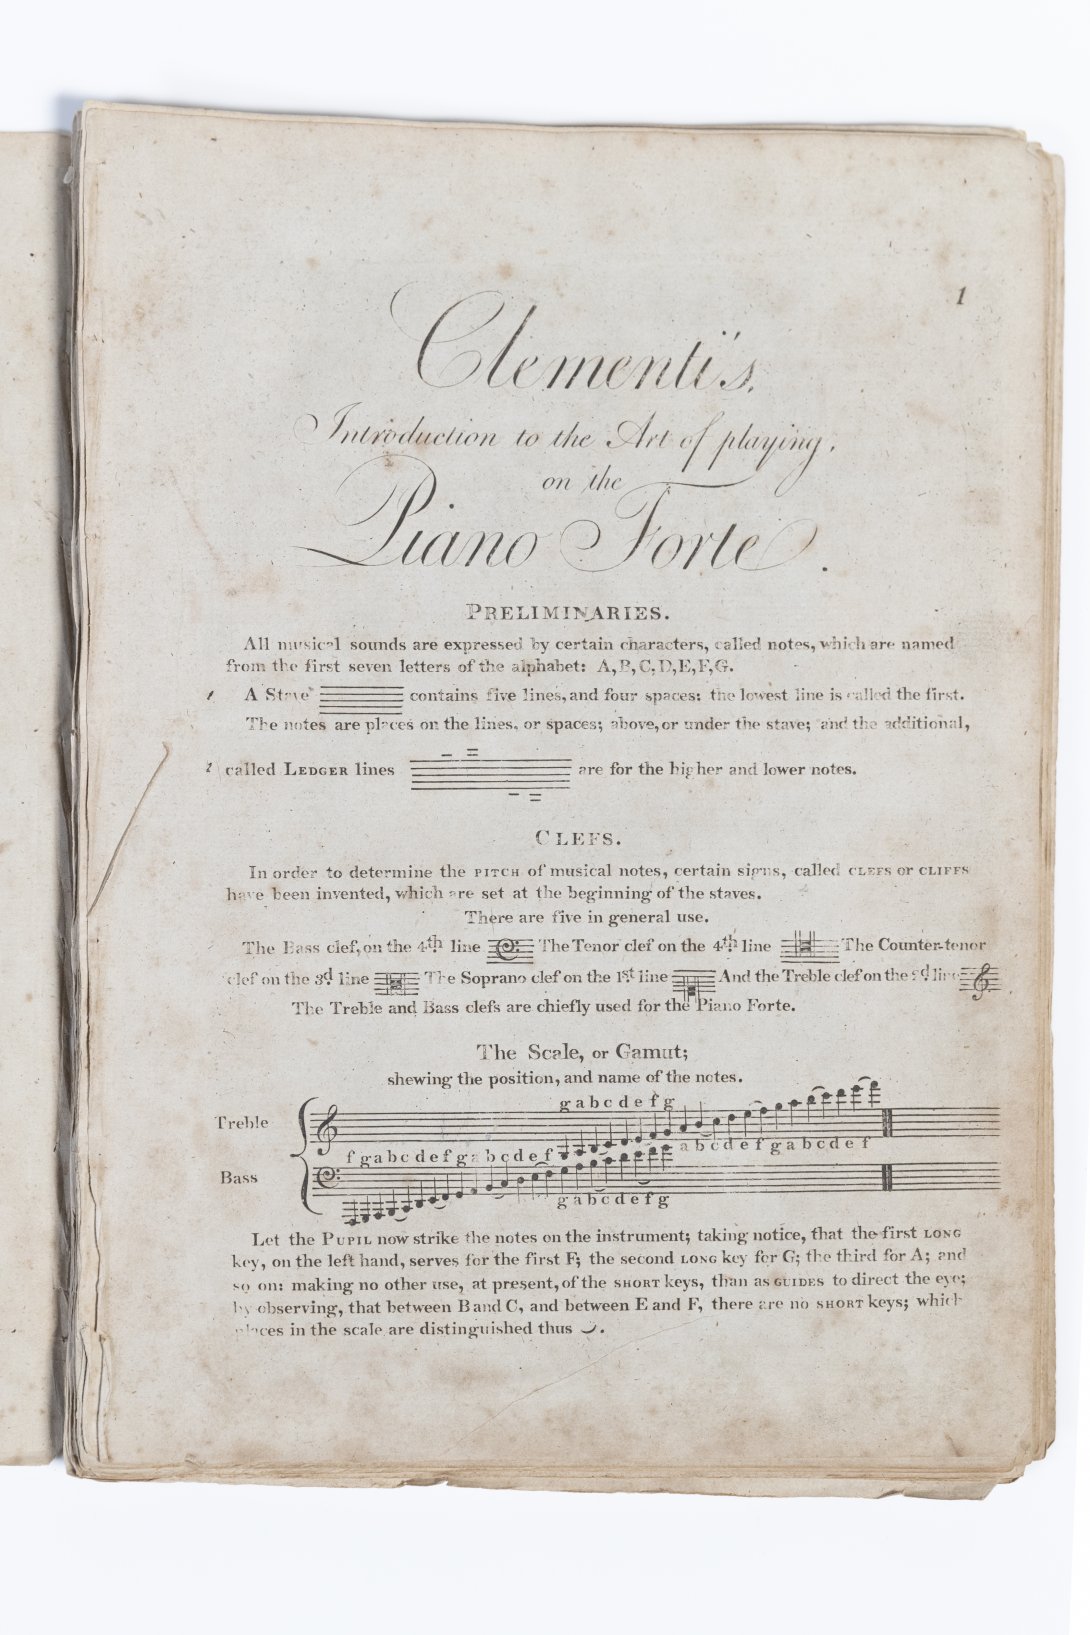 Faintly printed title page and beginning of a musical text book. 